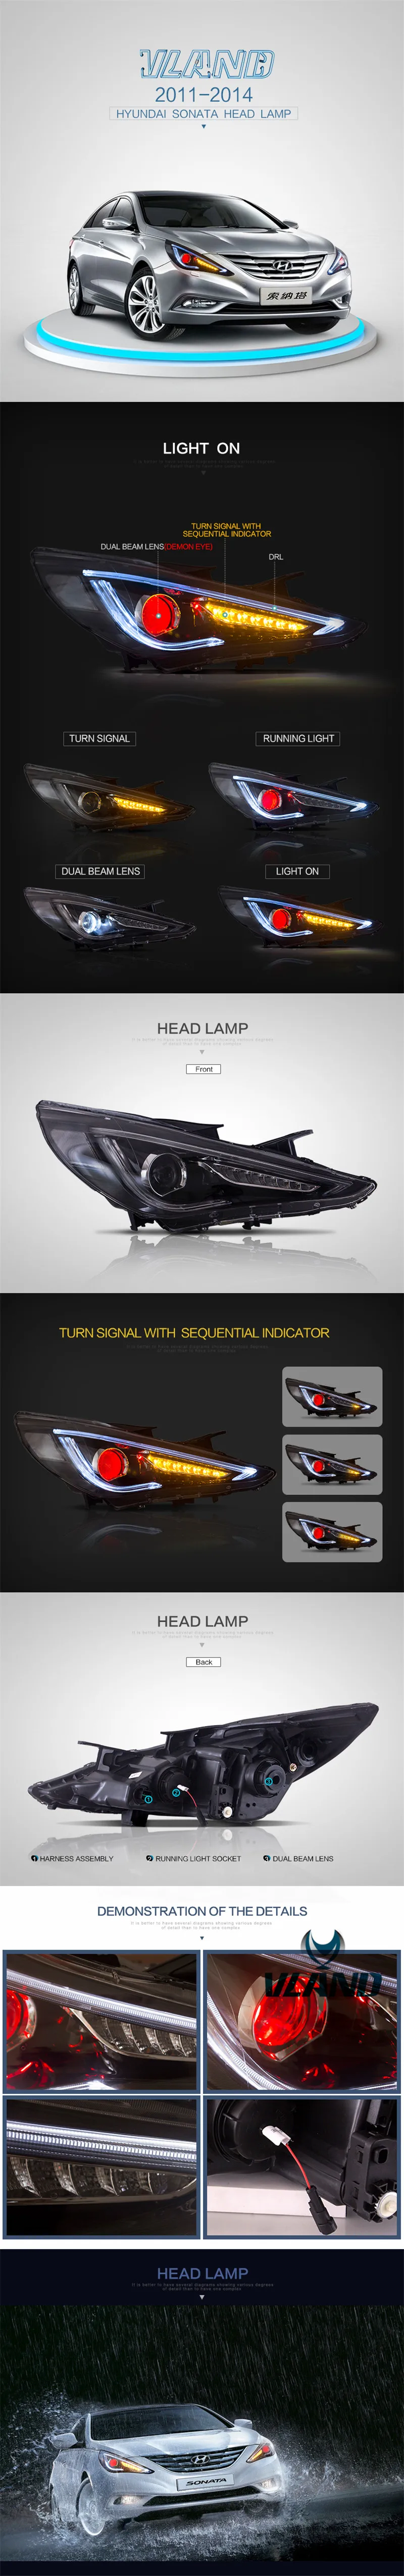 VLAND manufacturer for car headlight for SONATA head lamp 2011-2018 LED head light plug and play with moving signal & demon eye